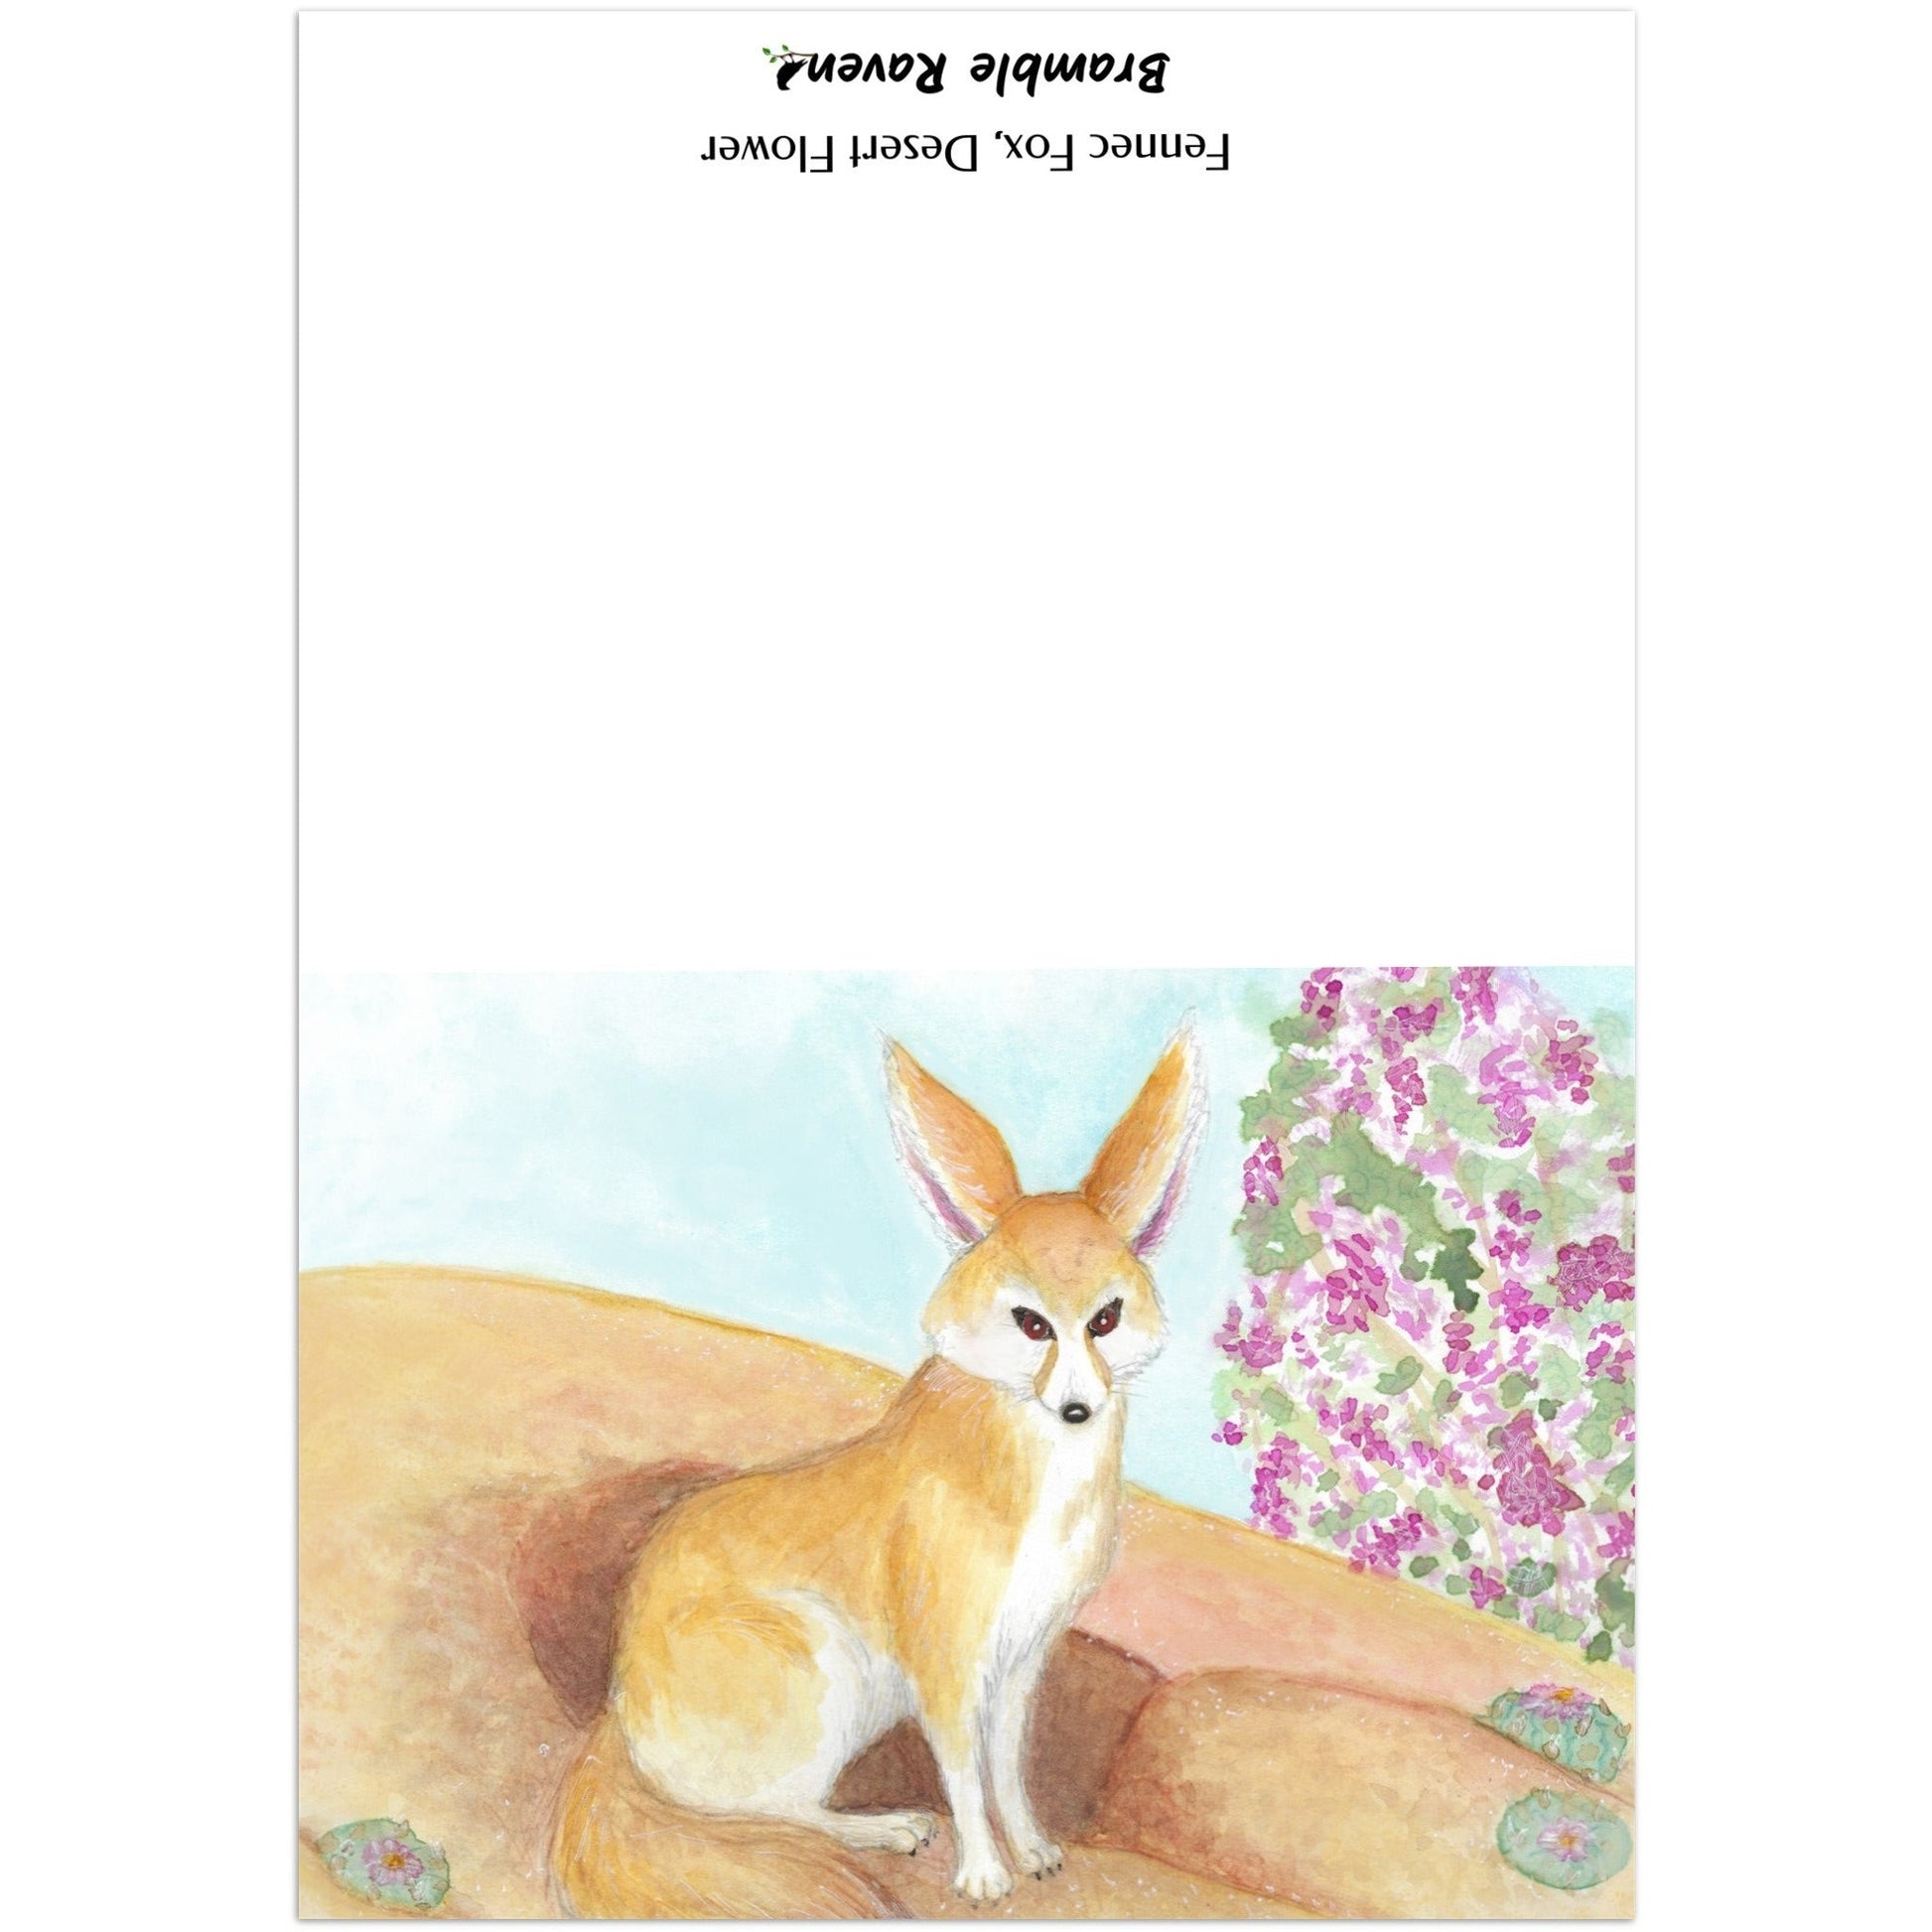 Pack of ten 5 x 7 inch greeting cards. Features watercolor print of fennec fox near it's den in the desert by a jacaranda tree on the front. Inside is blank. Made of coated paperboard. Comes with envelopes.